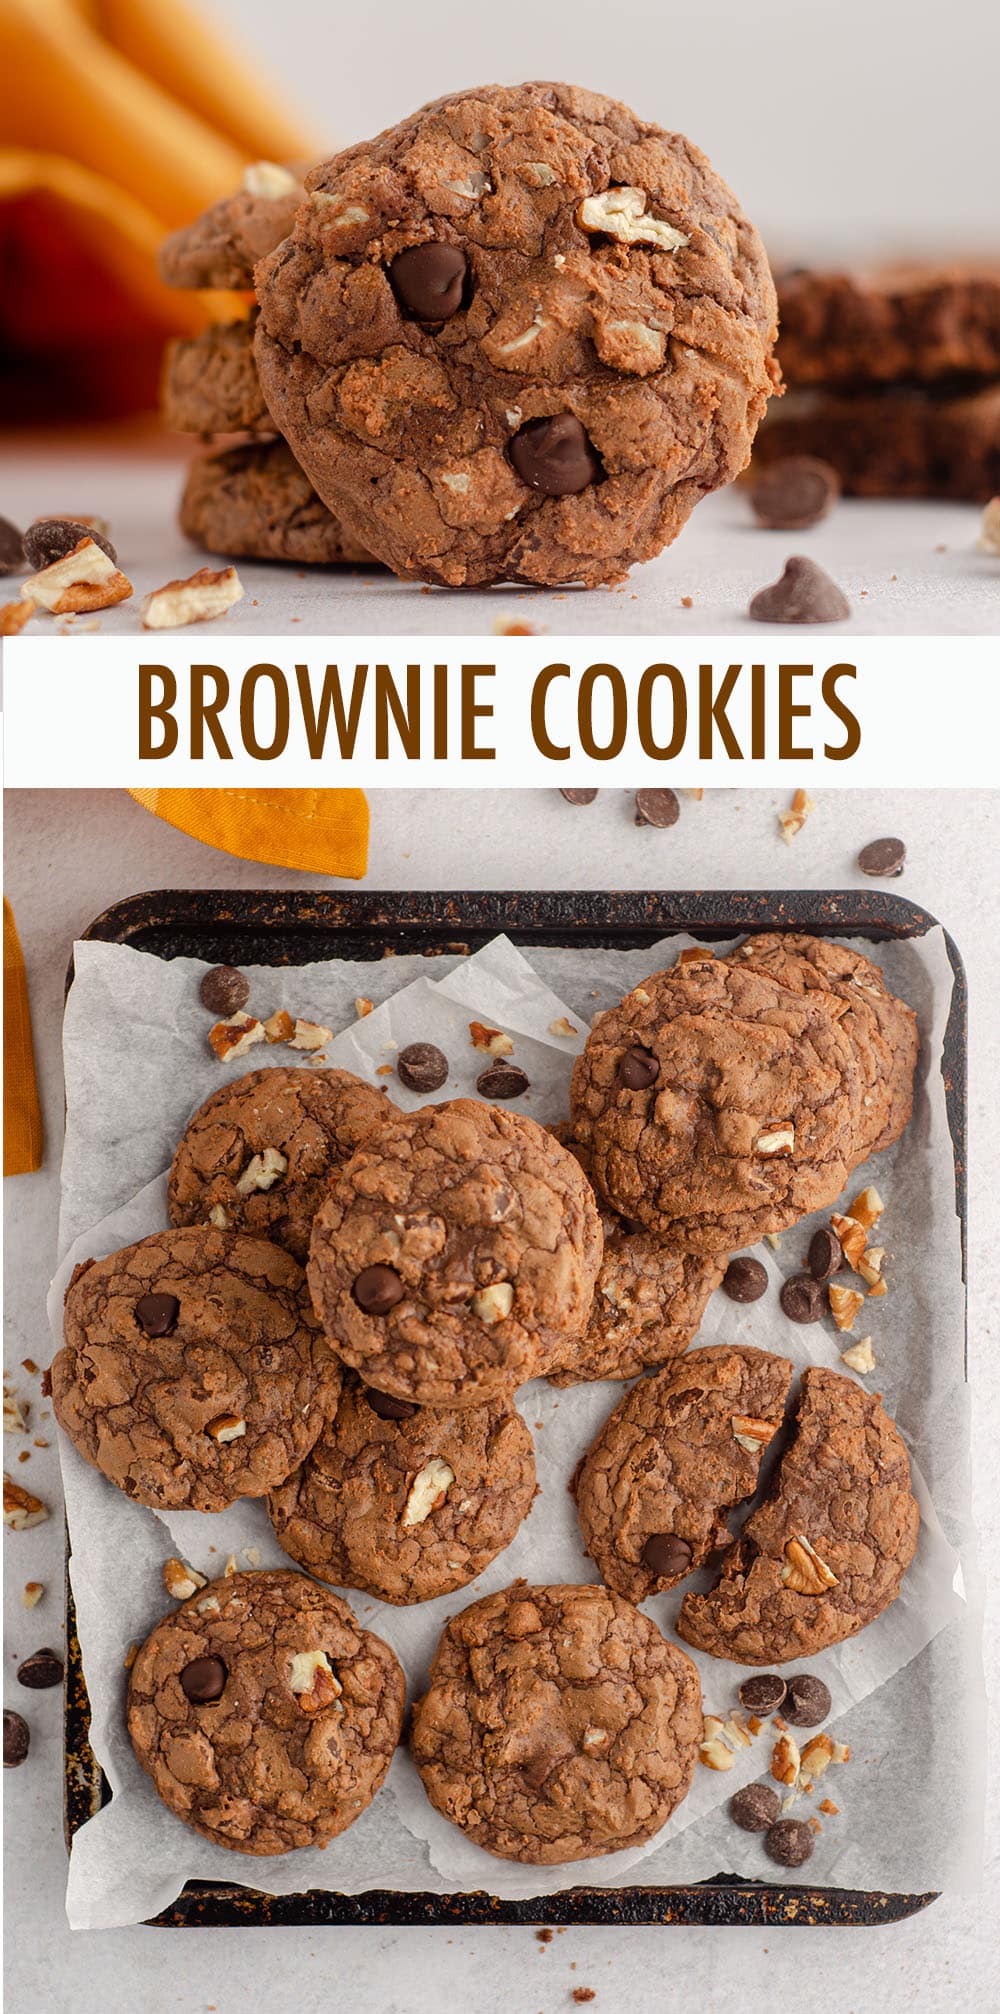 With a gooey center and signature crackly top like a brownie and a crisp exterior like a cookie, this brownie cookie is the best of both dessert worlds! via @frshaprilflours